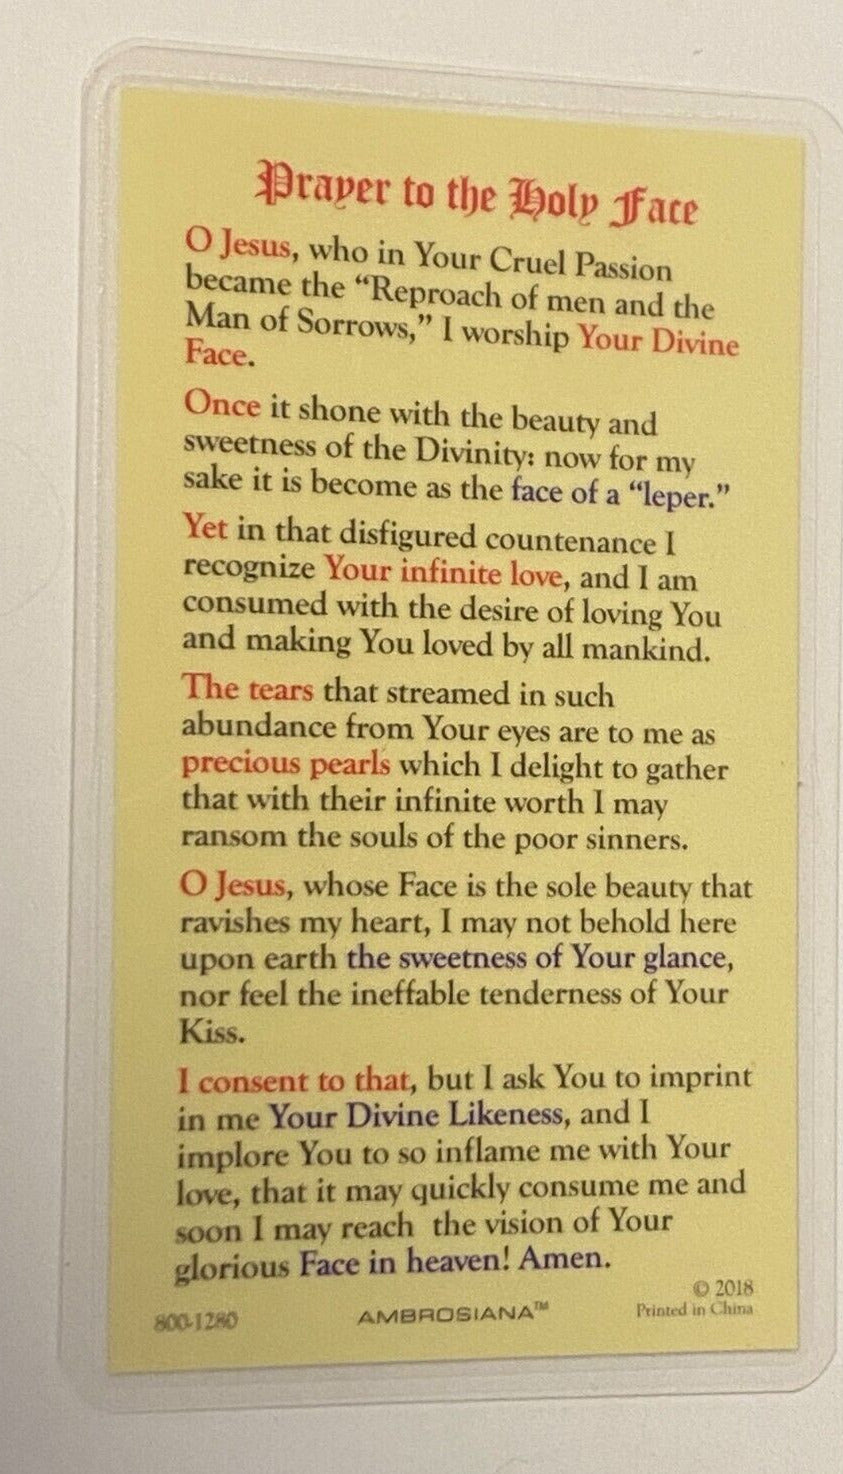 Saint Veronica "Prayer to the Holy Face of Jesus", Laminated Prayer Card, New - Bob and Penny Lord